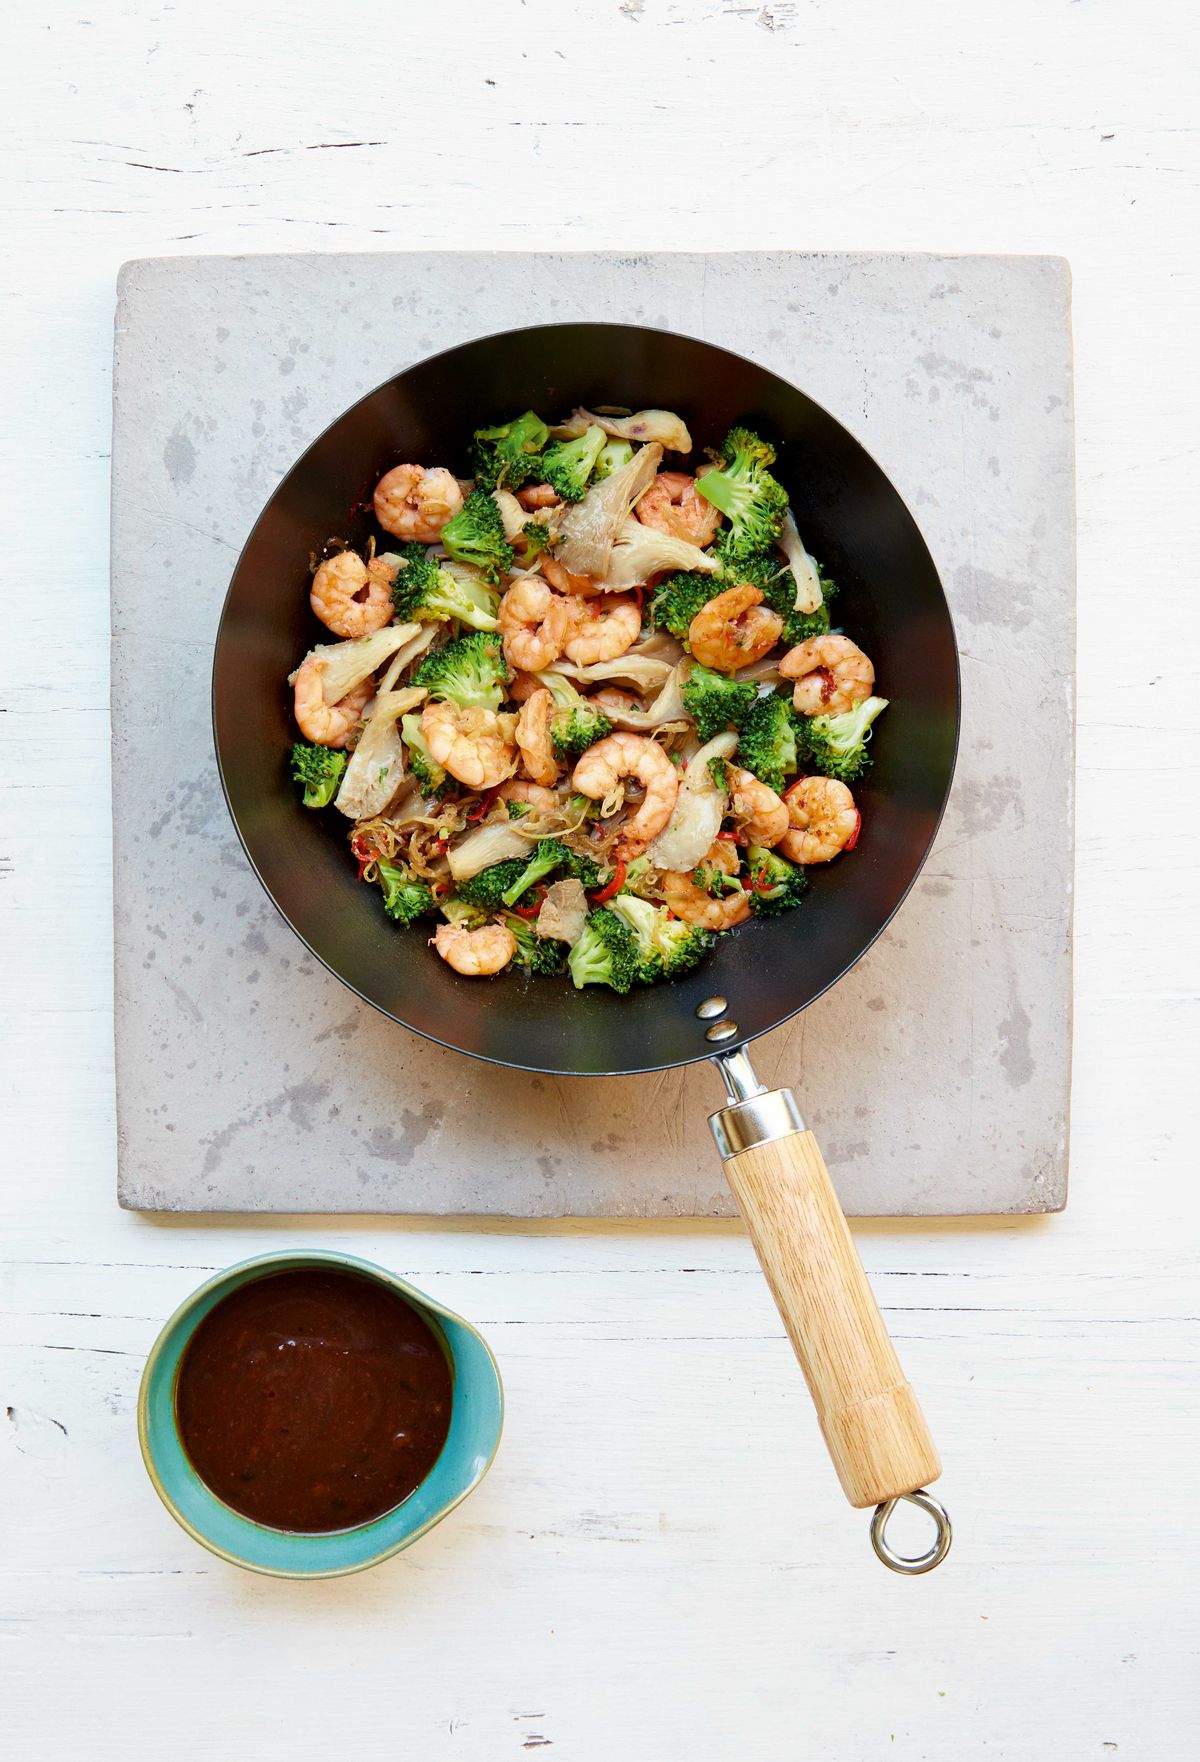 Mary Berry’s King Prawn and Broccoli Stir-Fry with Black Bean Sauce